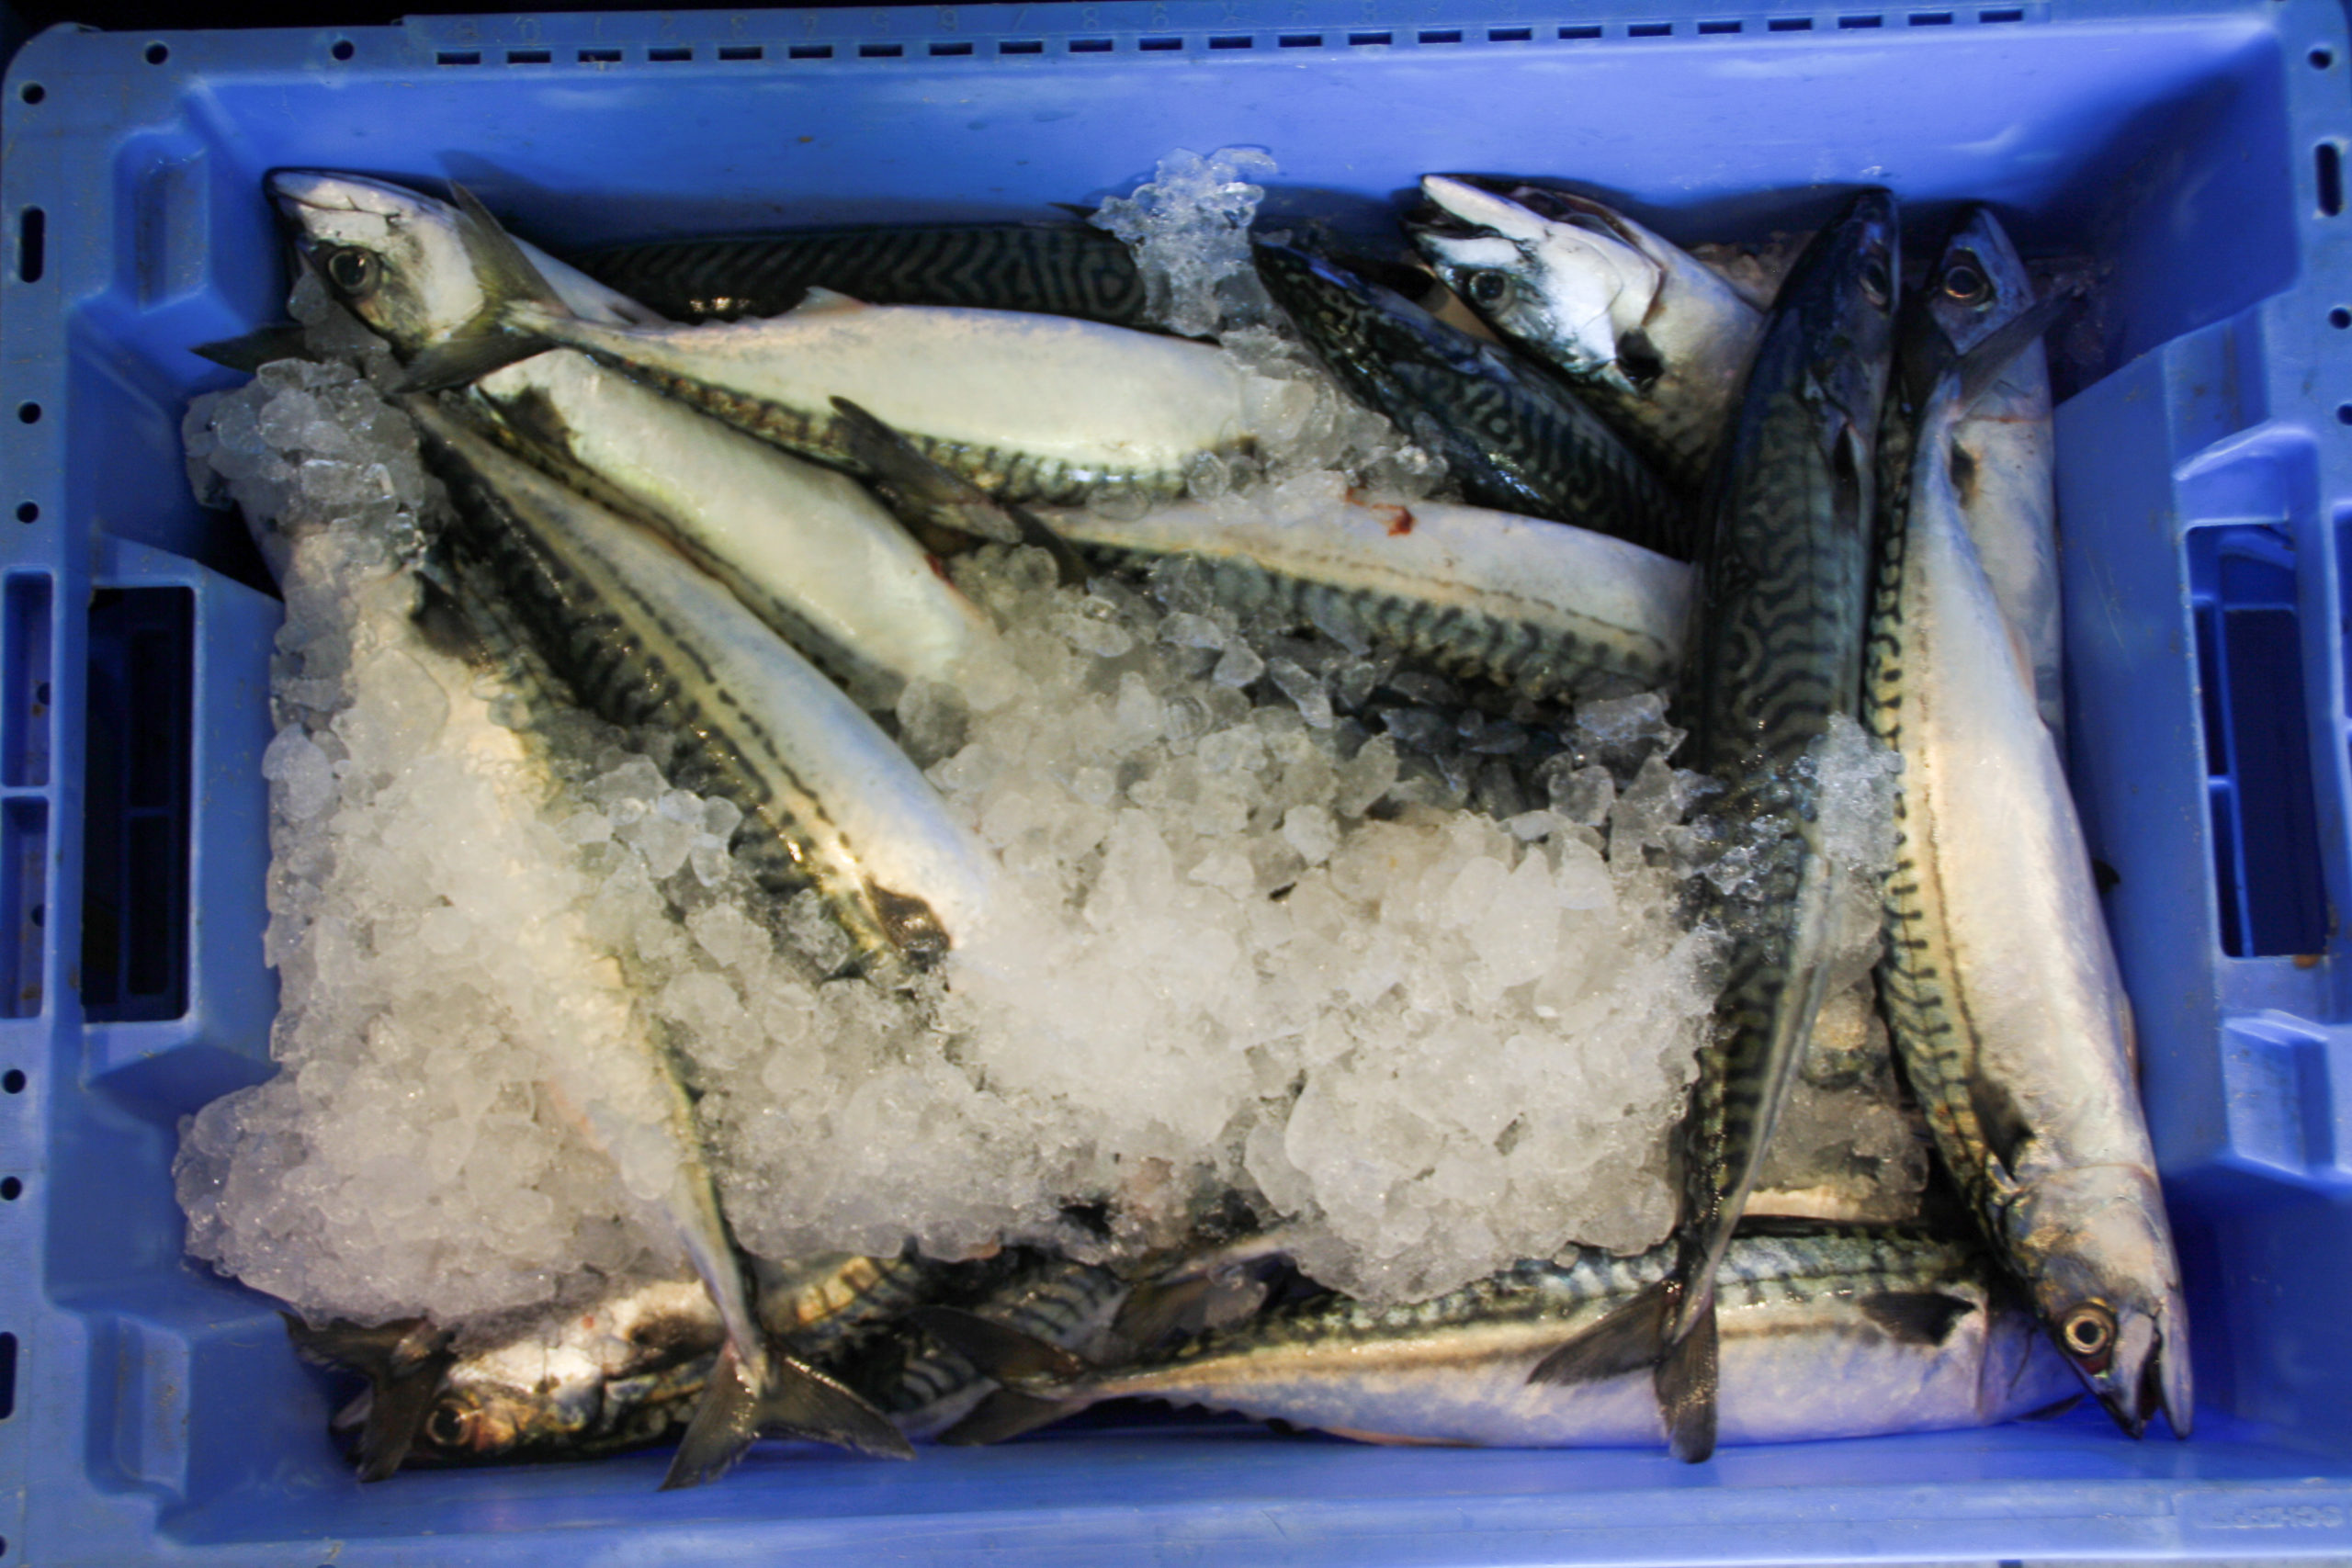 Fresh fish is delivered direct to the doorstep in the Cornish scheme (photo: Nina Constable)